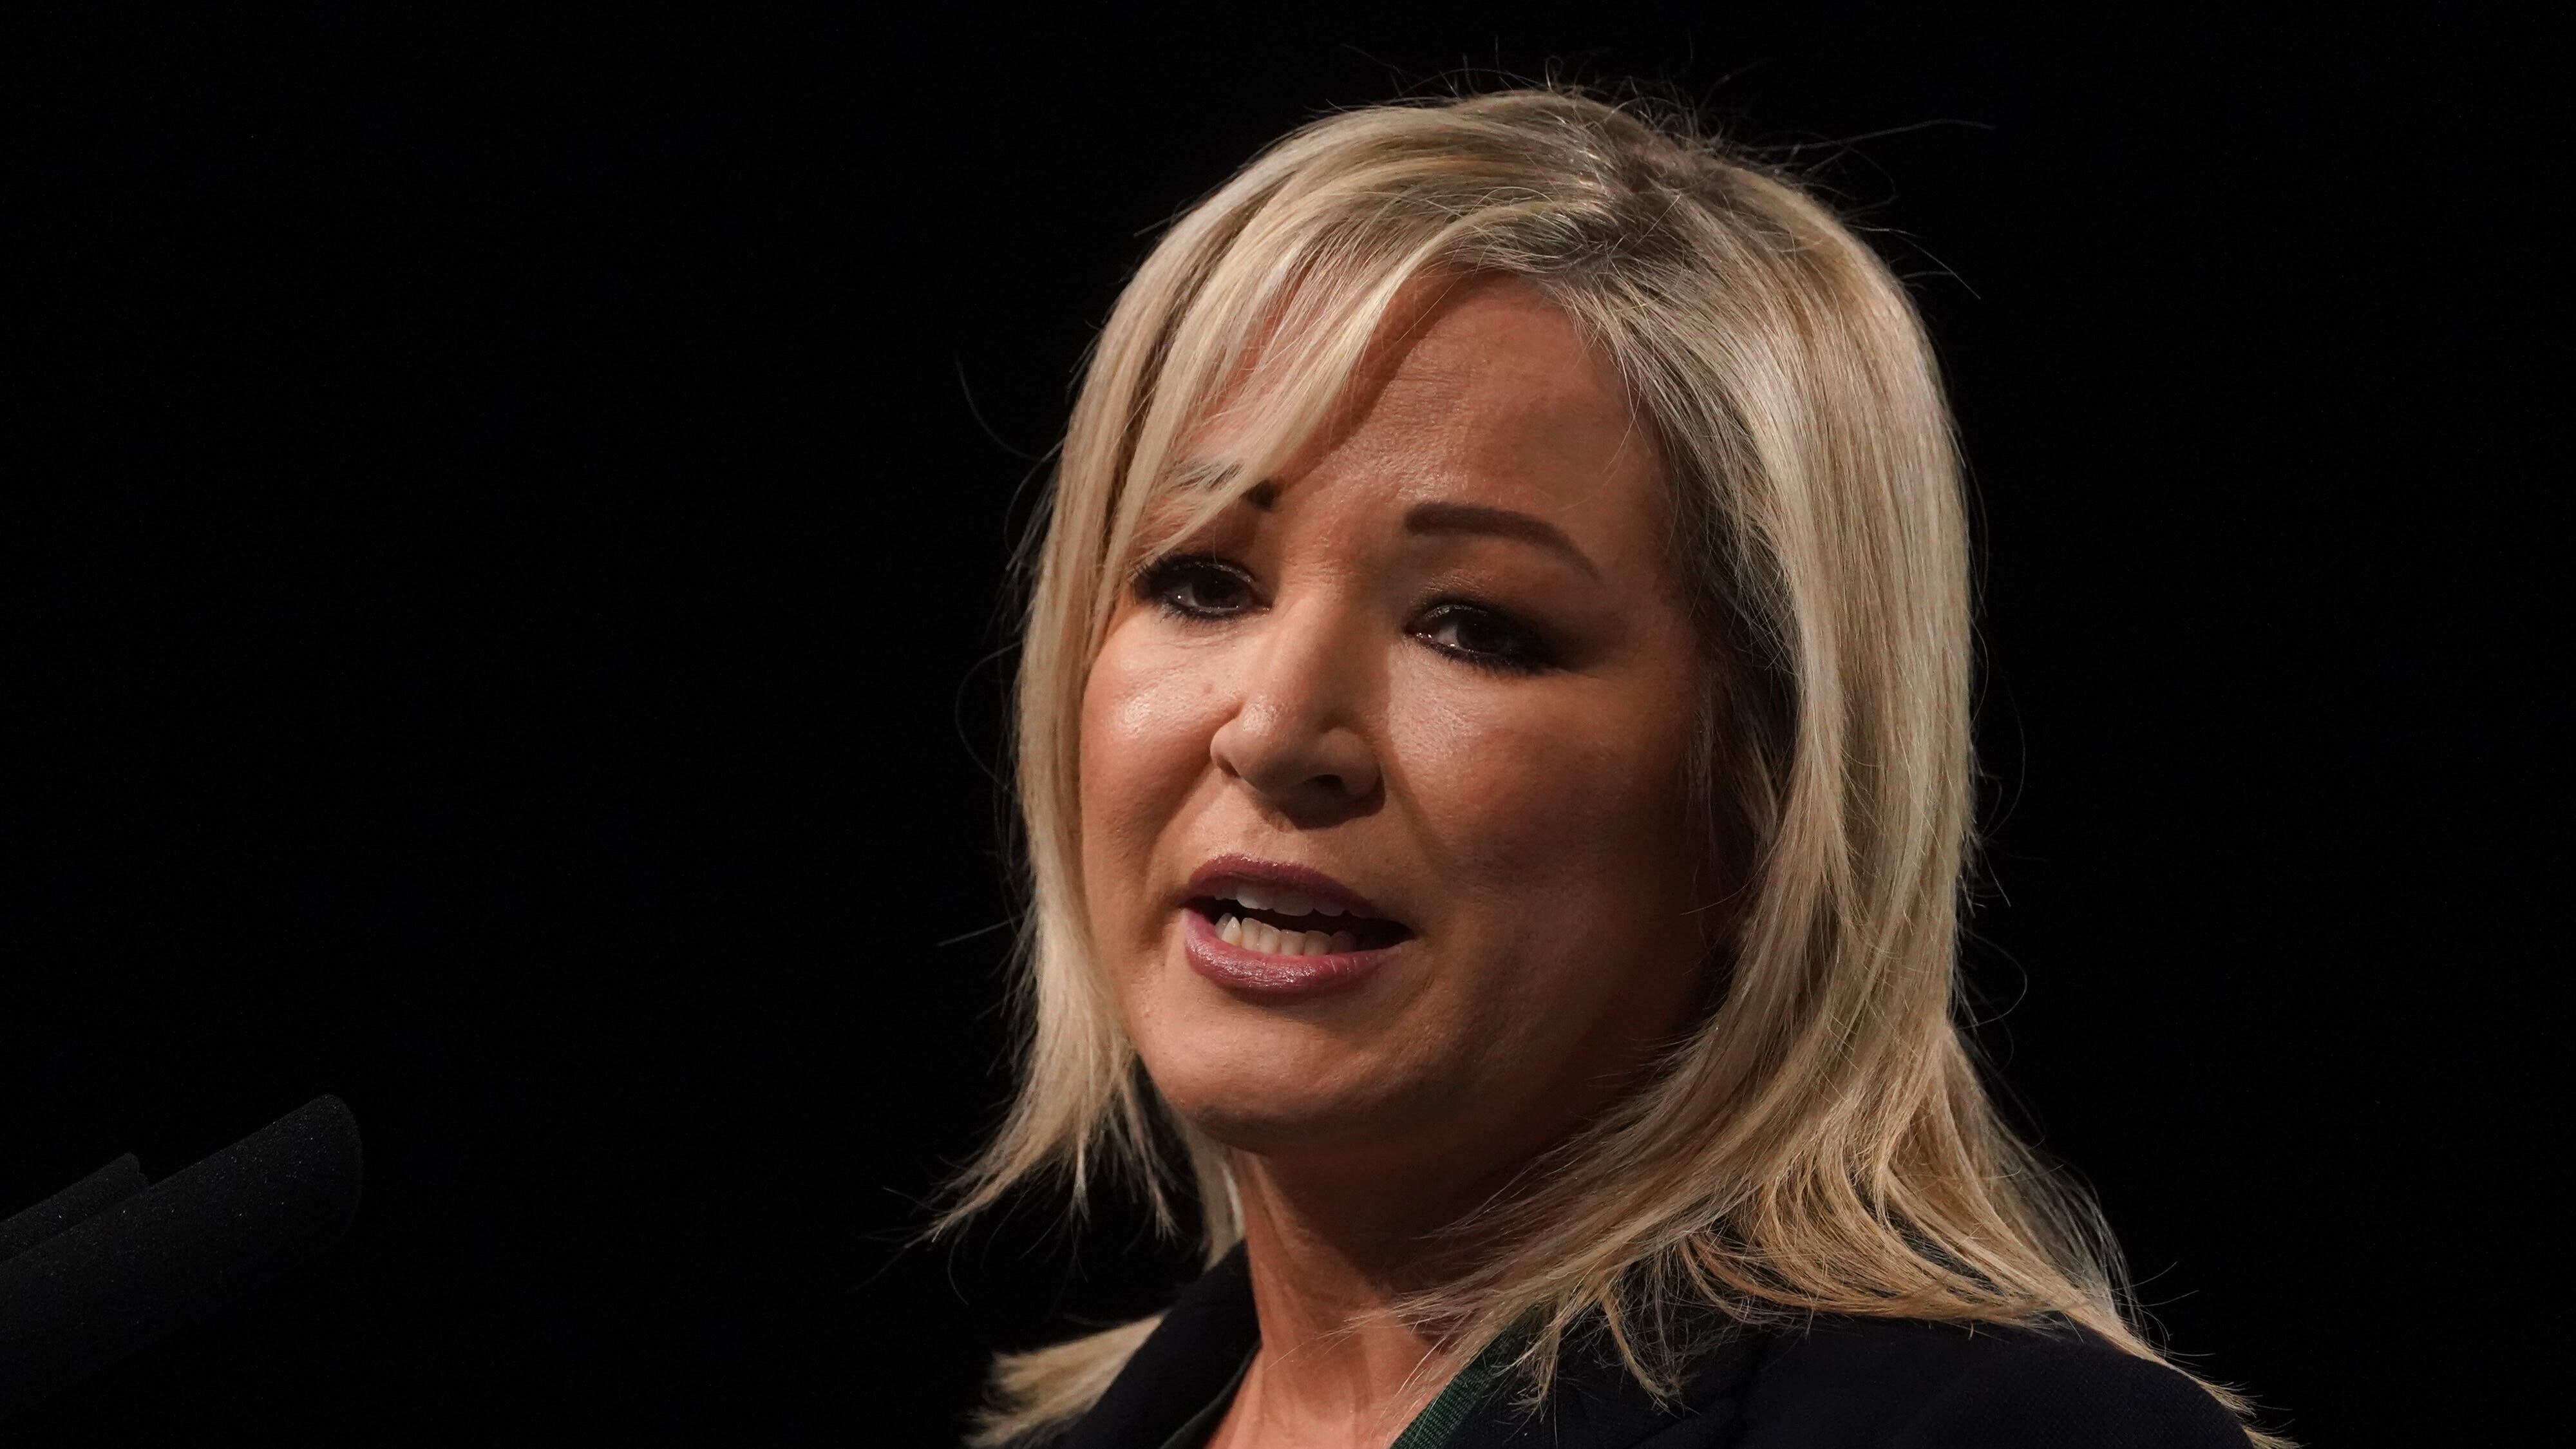 Michelle O’Neill has called for urgent action to address the Stormont stalemate (Brian Lawless/PA)